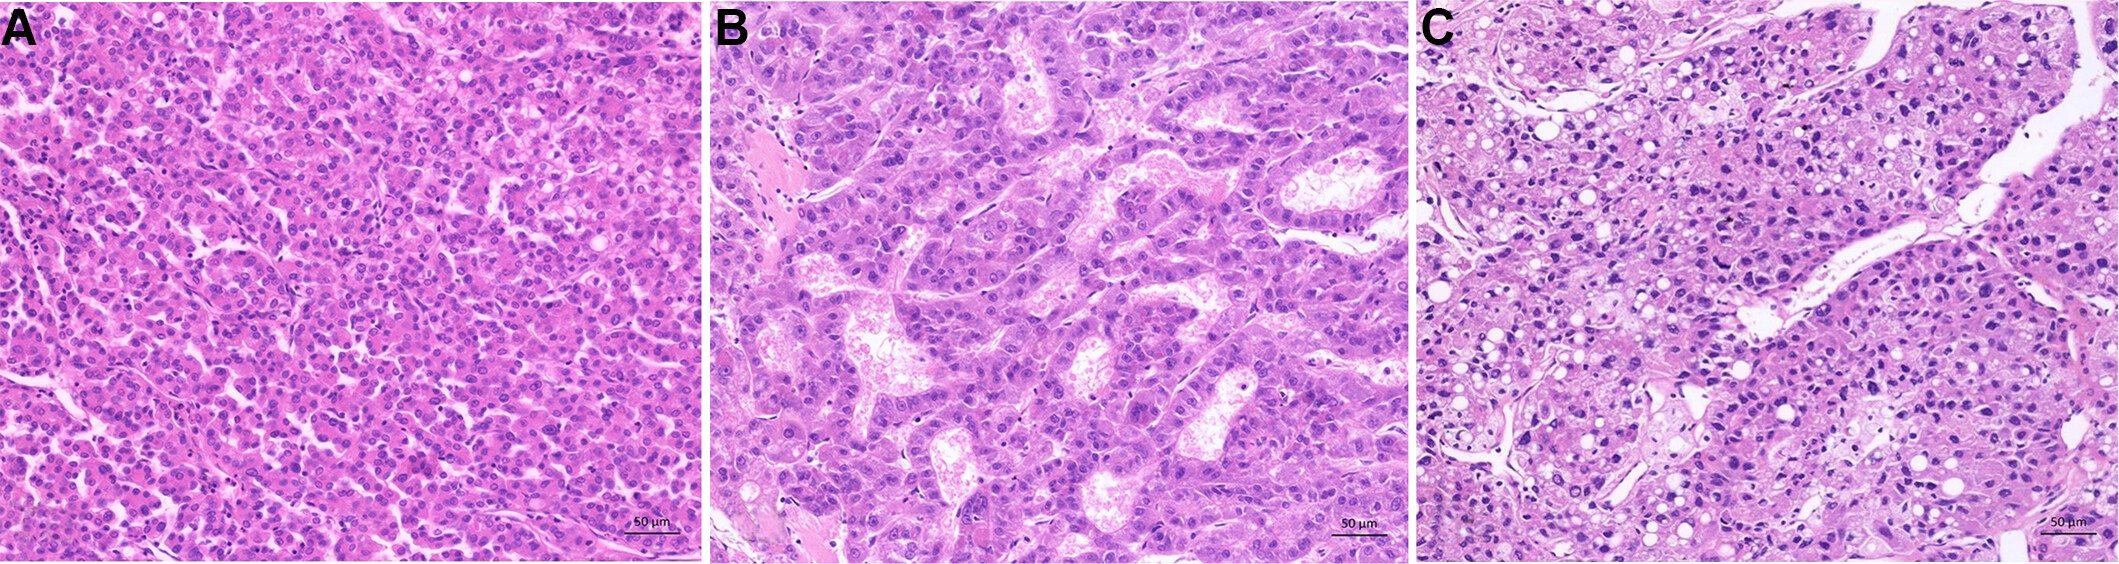 Histopathology of hepatocellular carcinoma - when and what